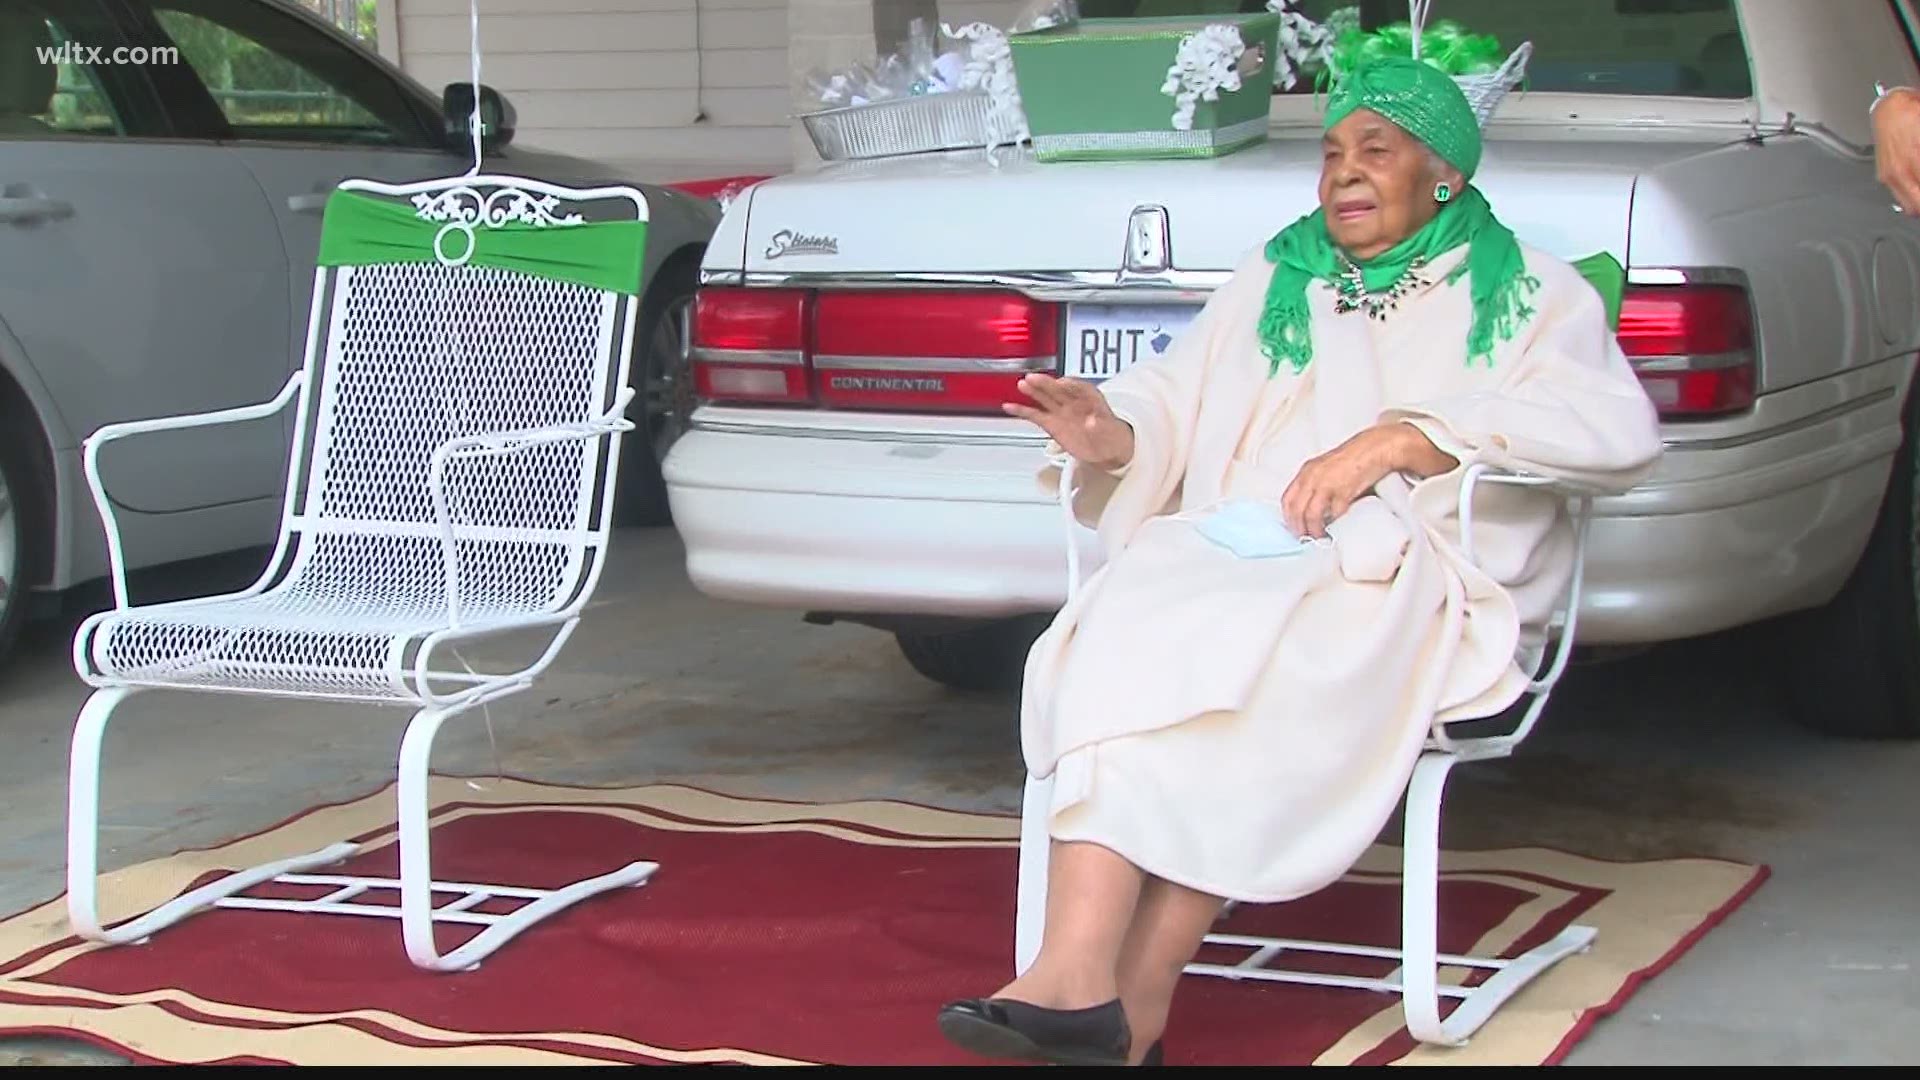 A Columbia woman turned 103-years-old over on Sunday, and was celebrated by a parade.